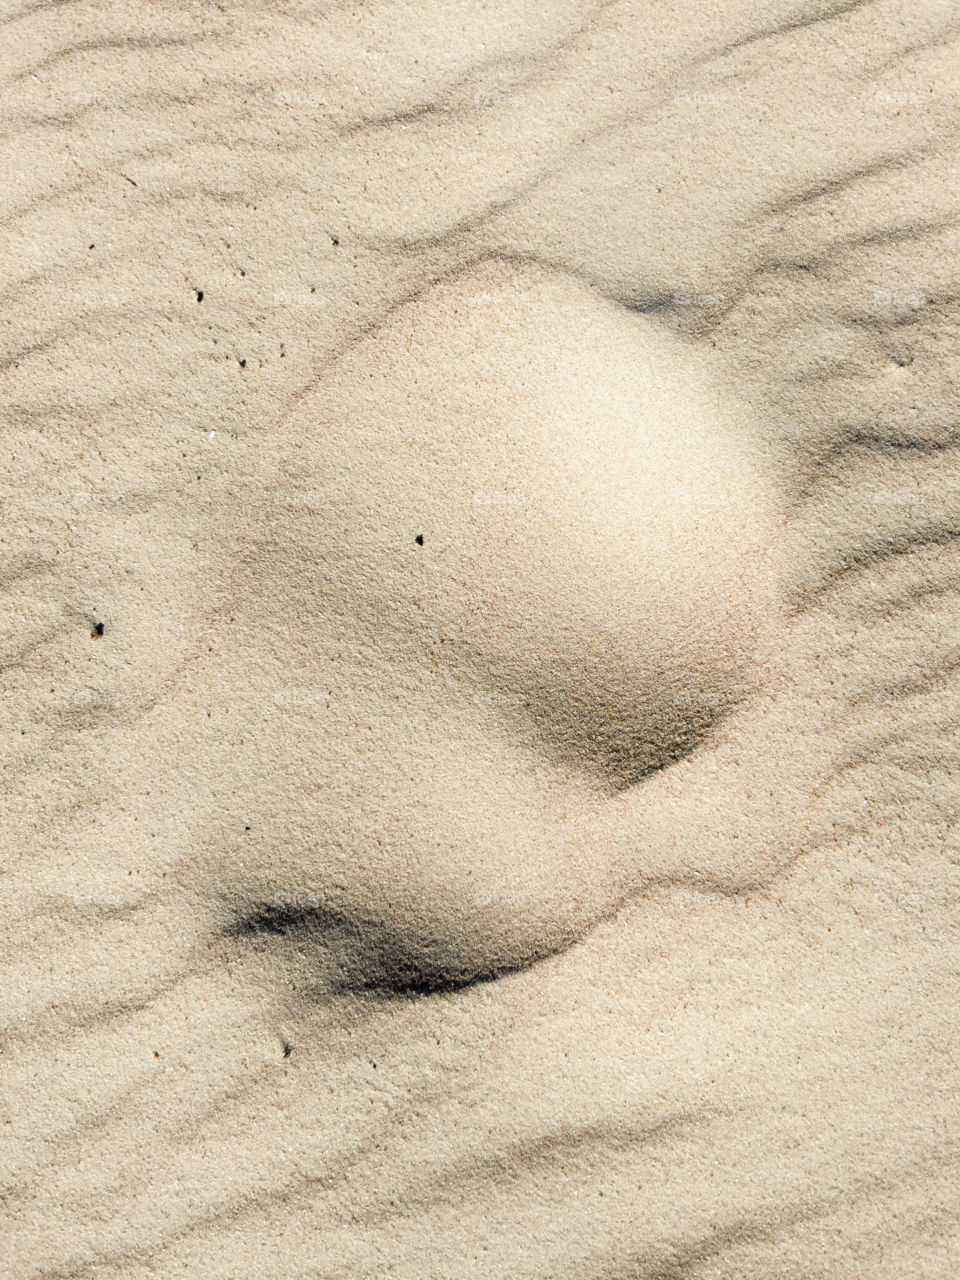 Elevated view of sand